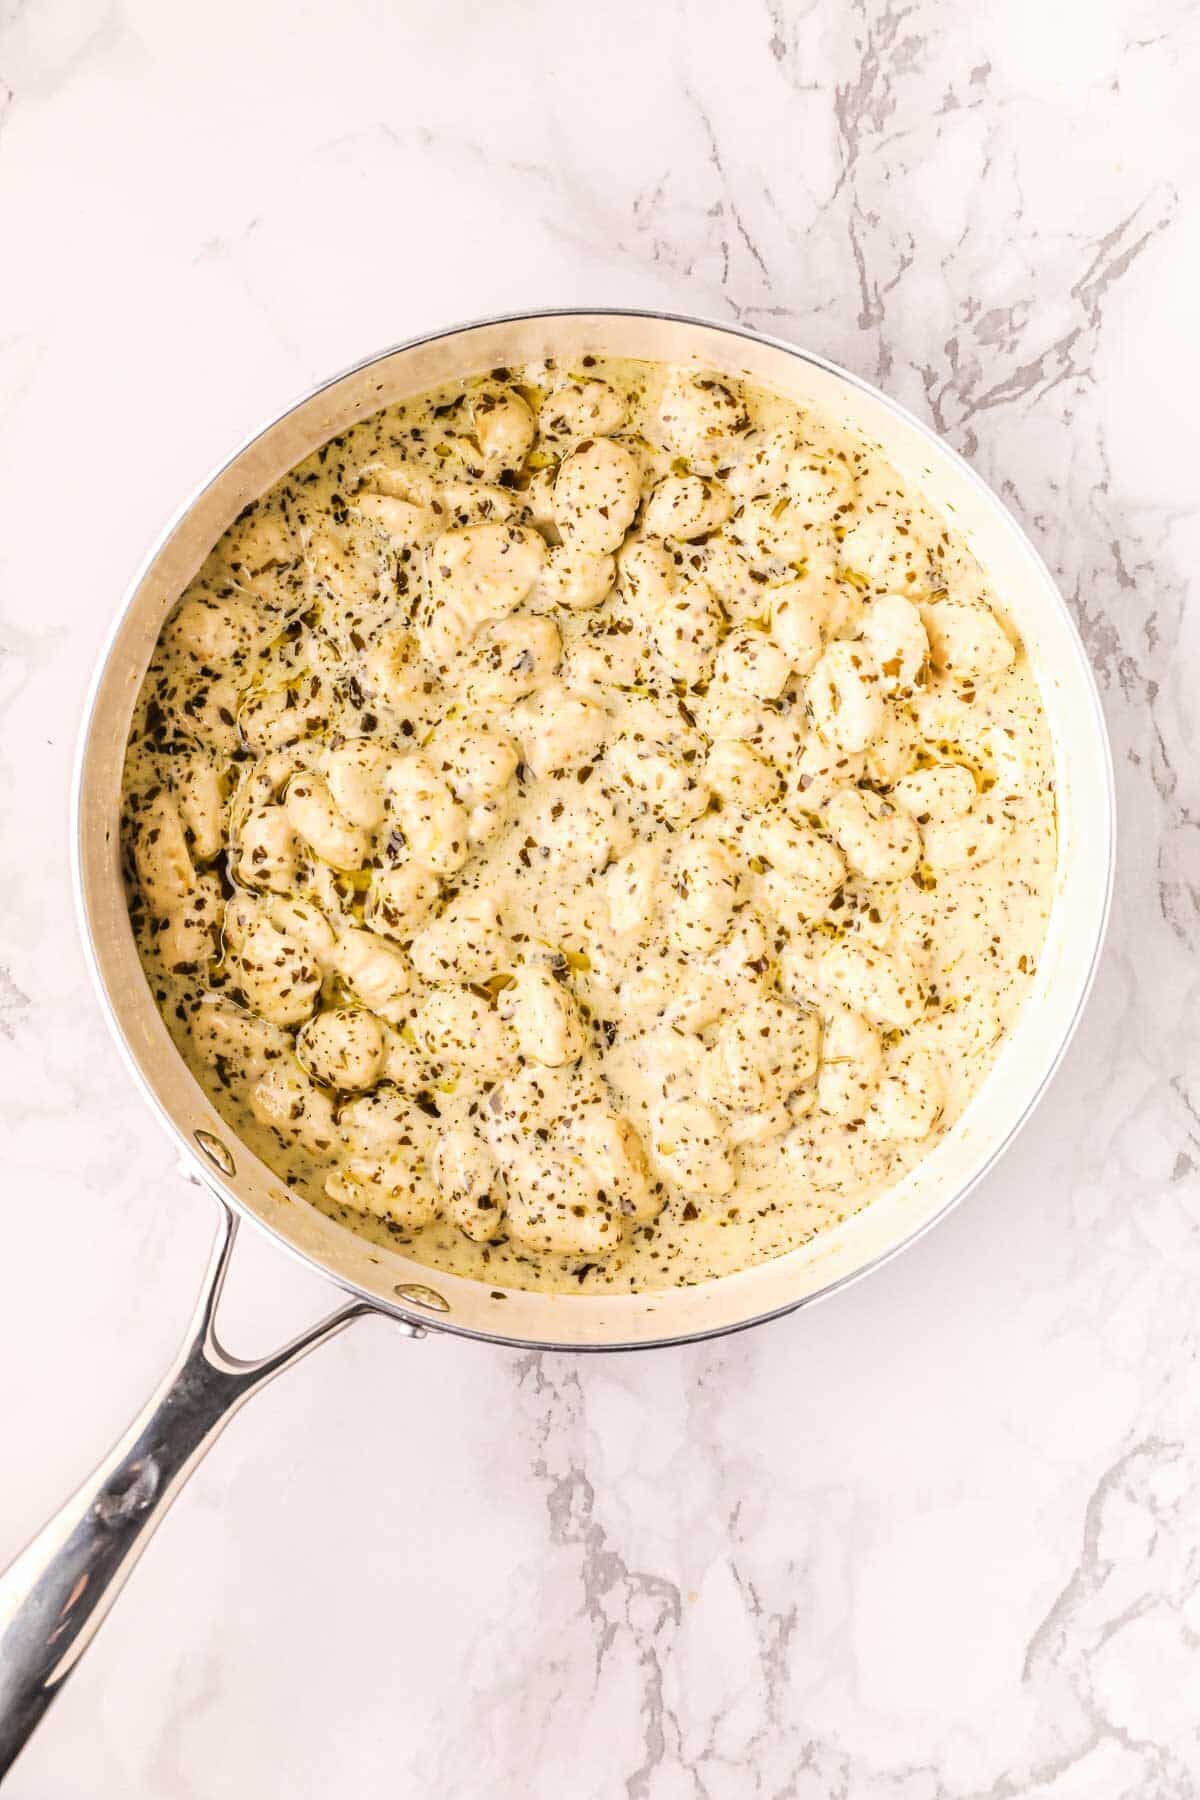 Creamy pesto gnocchi in a skillet cooking before cheese and lemon are added.